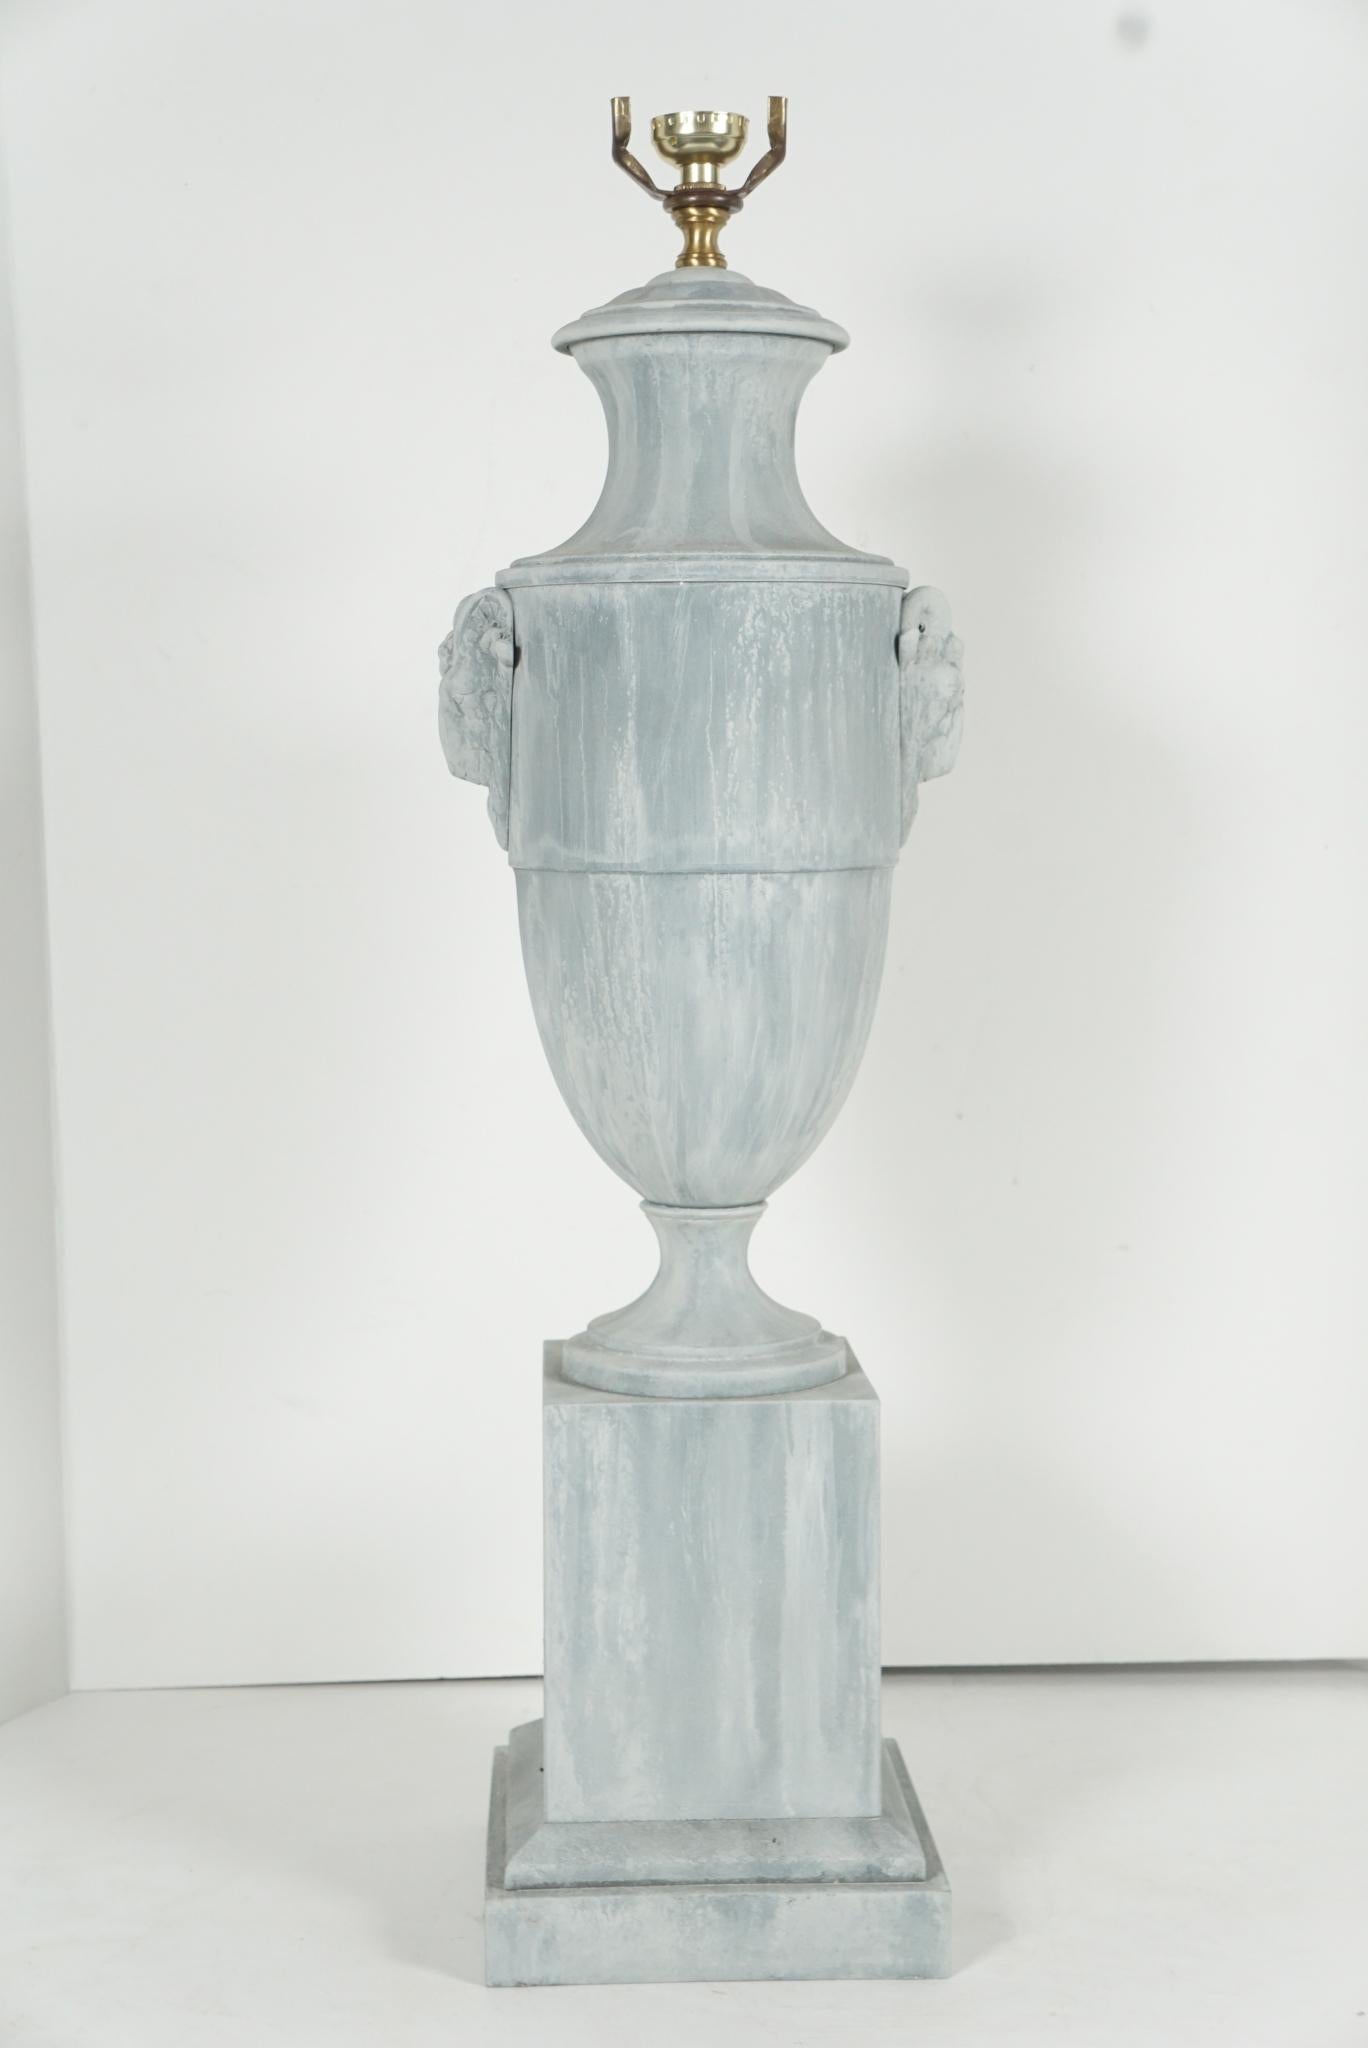 This urn made in France was produced as a decorative object circa 1920. Designed as a Louis XVI style urn with classical rams head handles the large-bodied urn rests on a raised block set up on a stepped base. Once possibly painted in a marbled